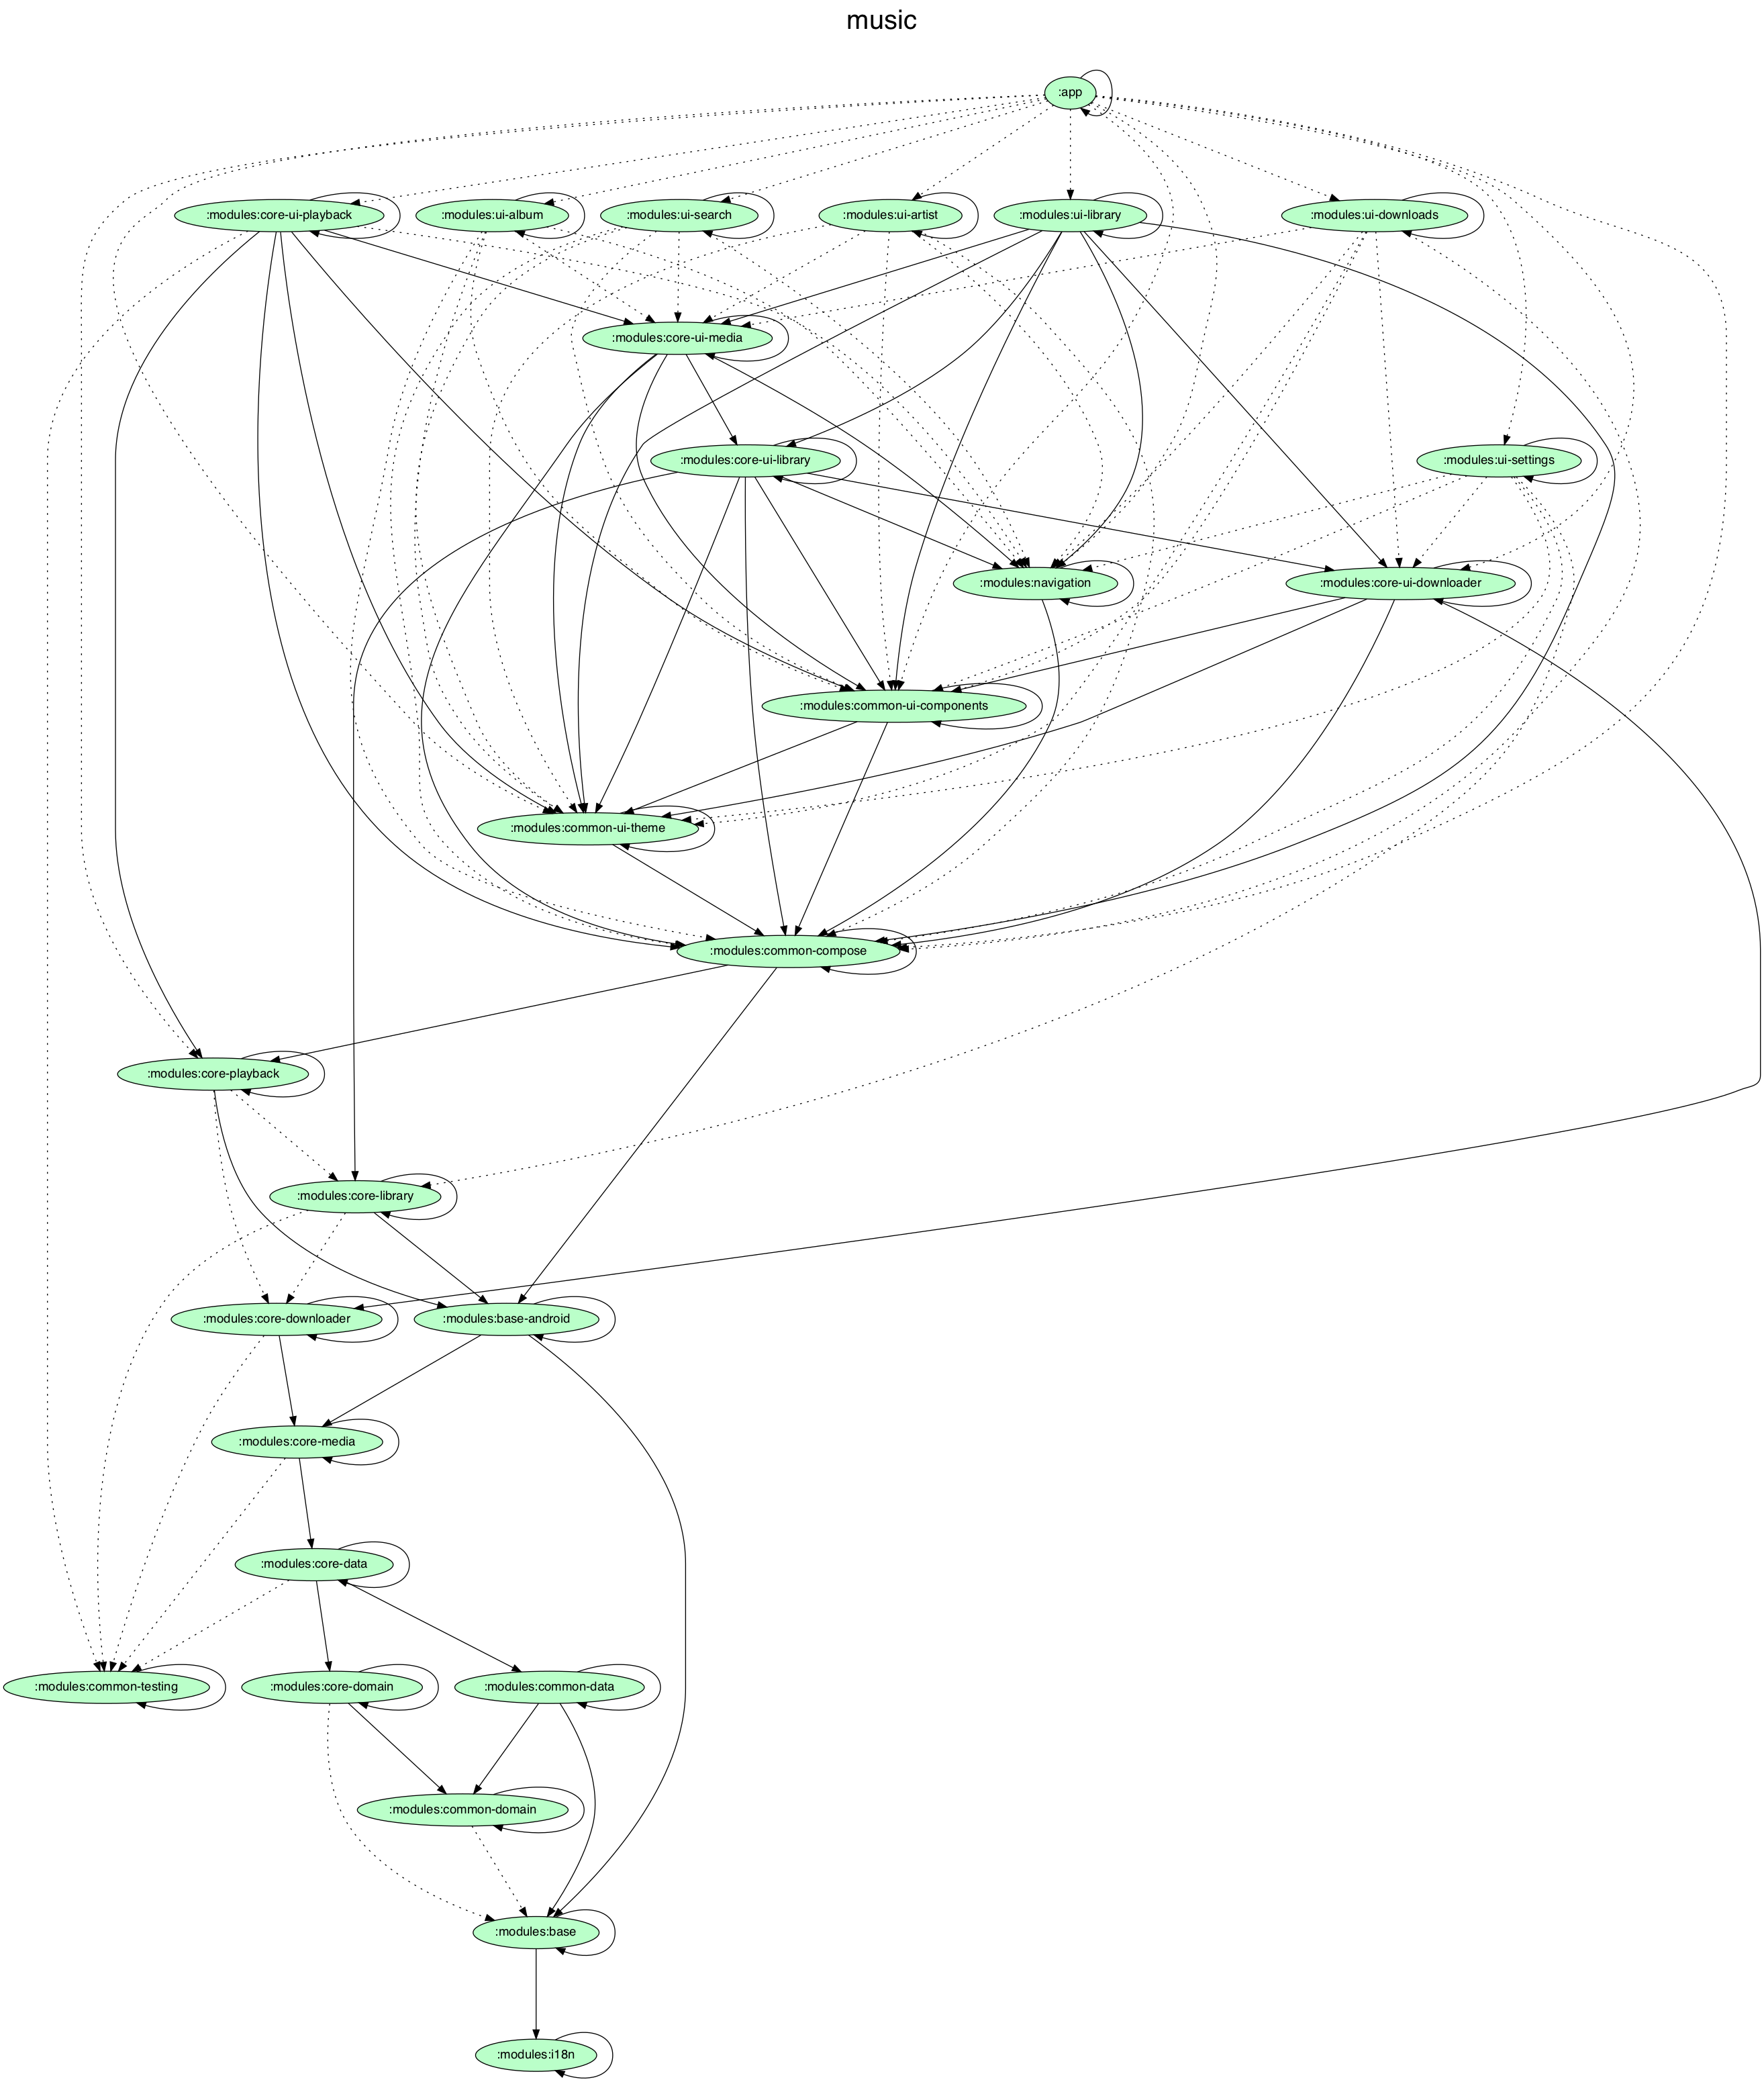 Project dependency graph